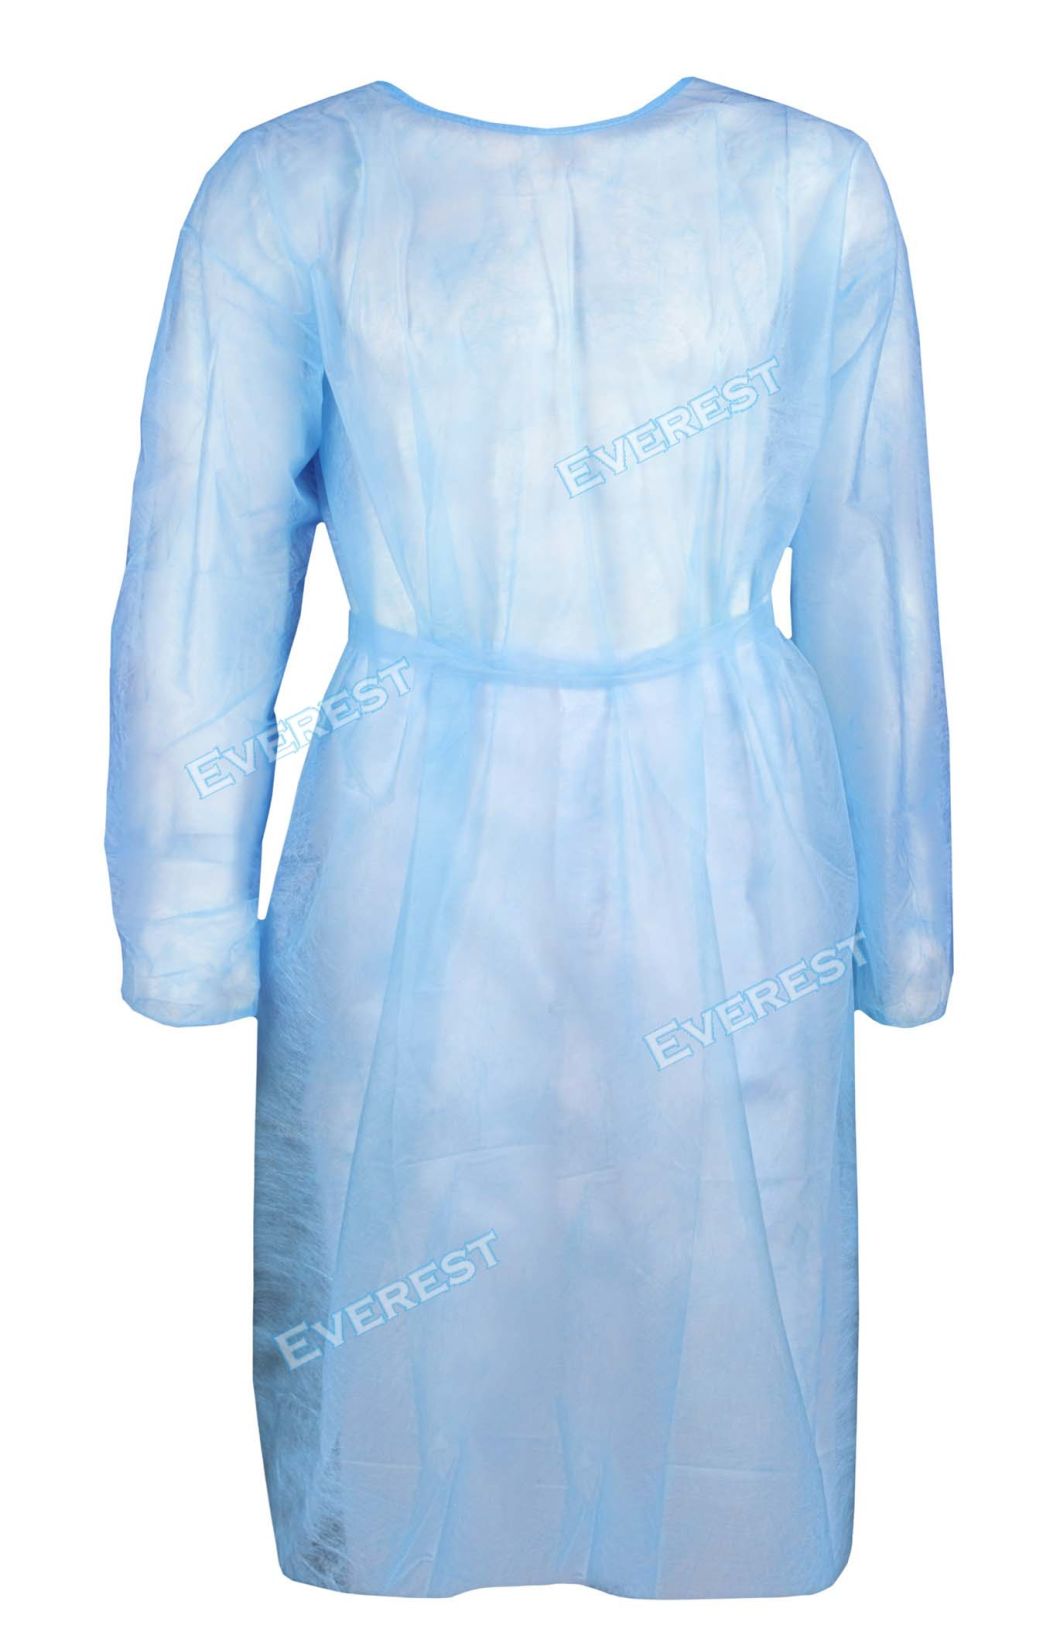 Non Woven/SMS/CPE Medical Gown/Hospital Gown/Surigcal Gown/Surgeon Gown/PP Sterile Reinforced Disposable Surgical Gown, Isolation Gown, Disposable Patient Gown